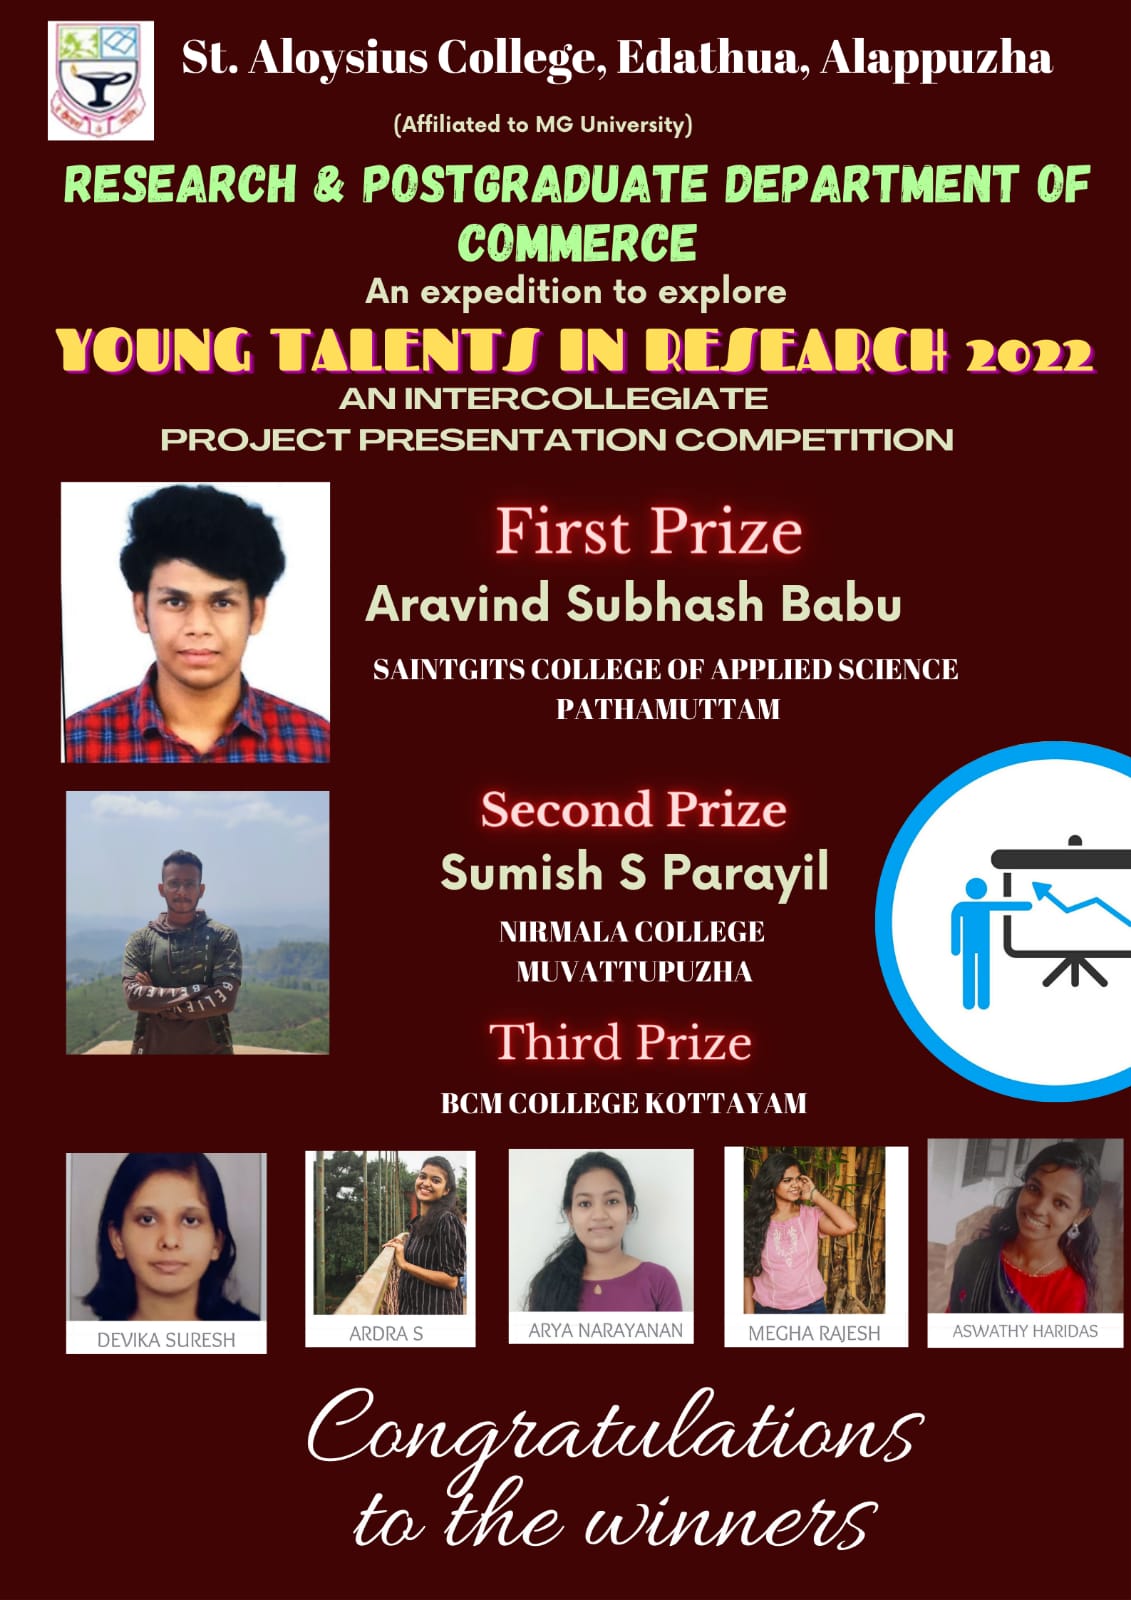 Aravind Subhash Babu (St Gits College, Kottayam) and Sumish S Parayil (Nirmala College, Muvattupuzha) secured first and second prizes for Young Talents in Research 2022: Project Presentation Competition organised by the Research and Post Graduate Department of Commerce.